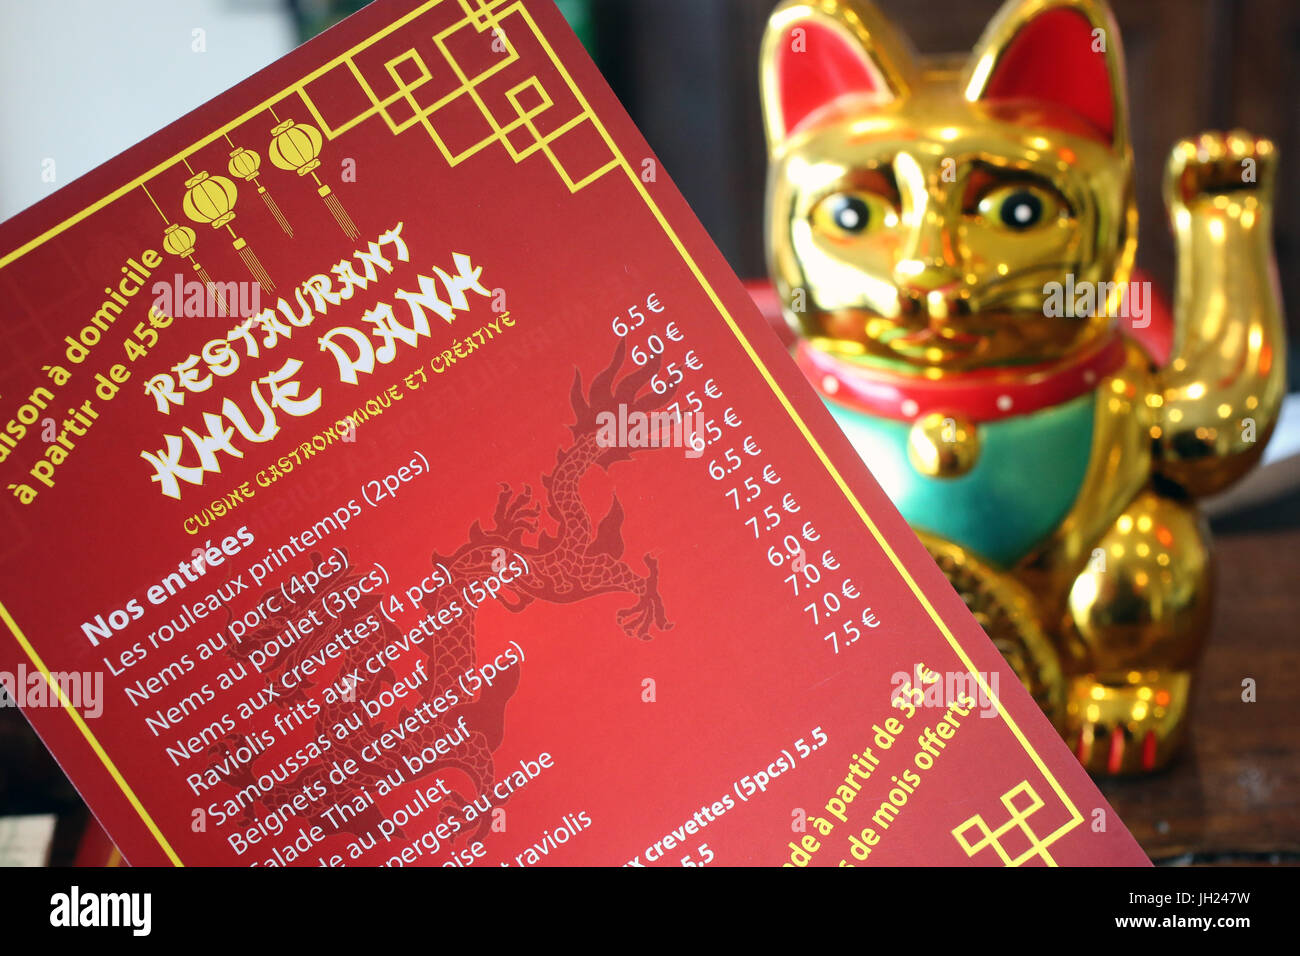 Menu and The Maneki-neko also known as Welcoming Cat, Lucky Cat, Money Cat, or Fortune Cat. Stock Photo